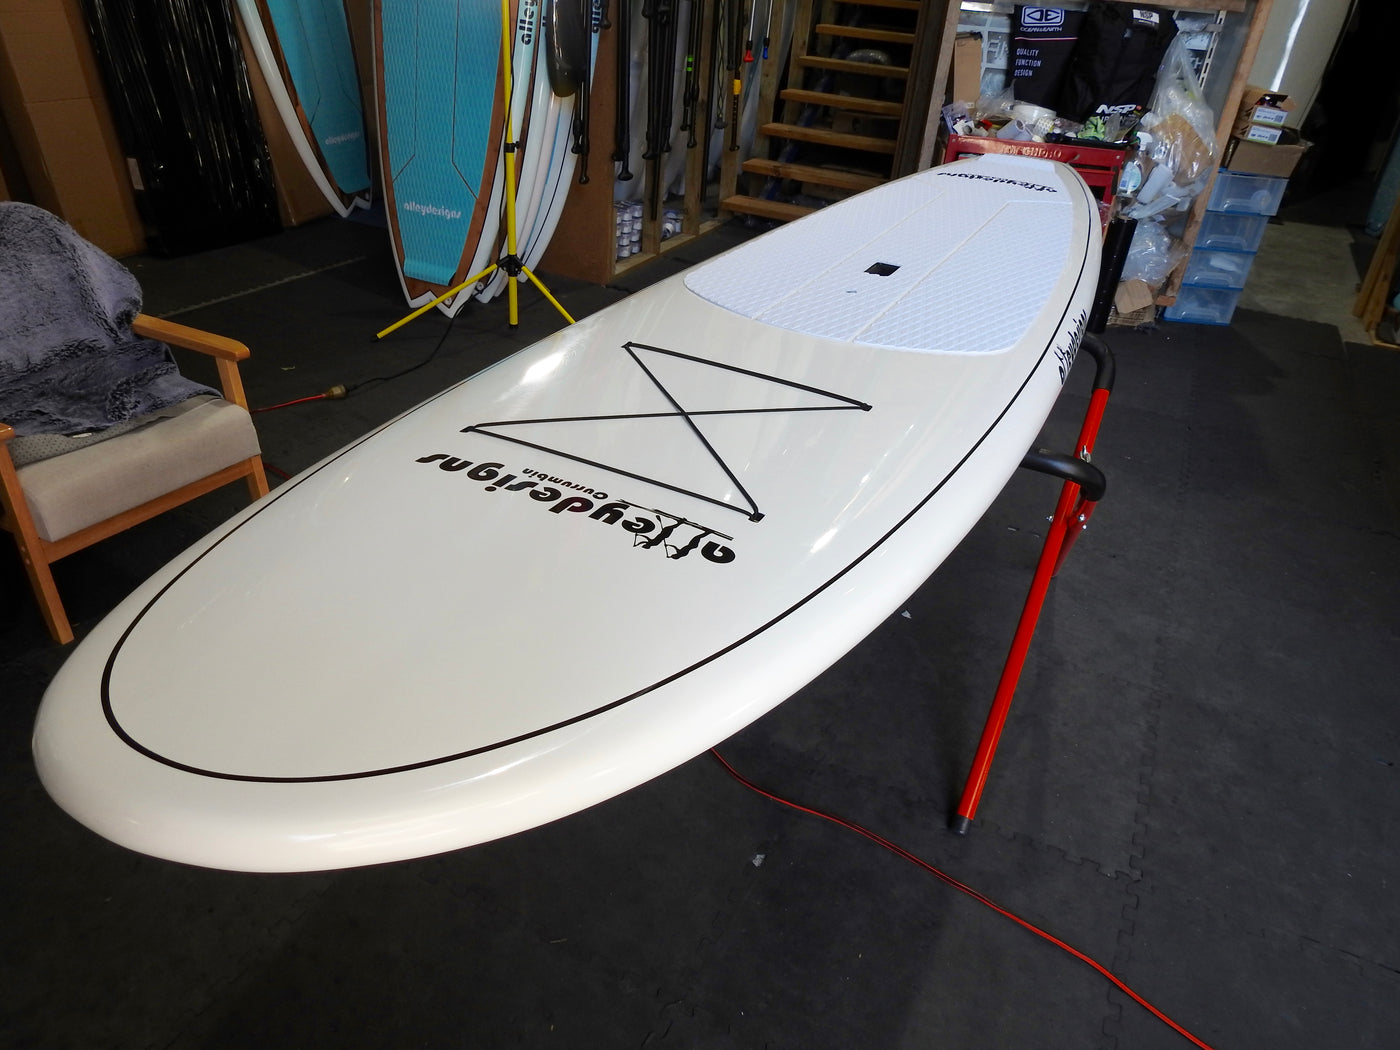 11’6” x 33” White Alleydesigns Family SUP 240L - Alleydesigns  Pty Ltd                                             ABN: 44165571264